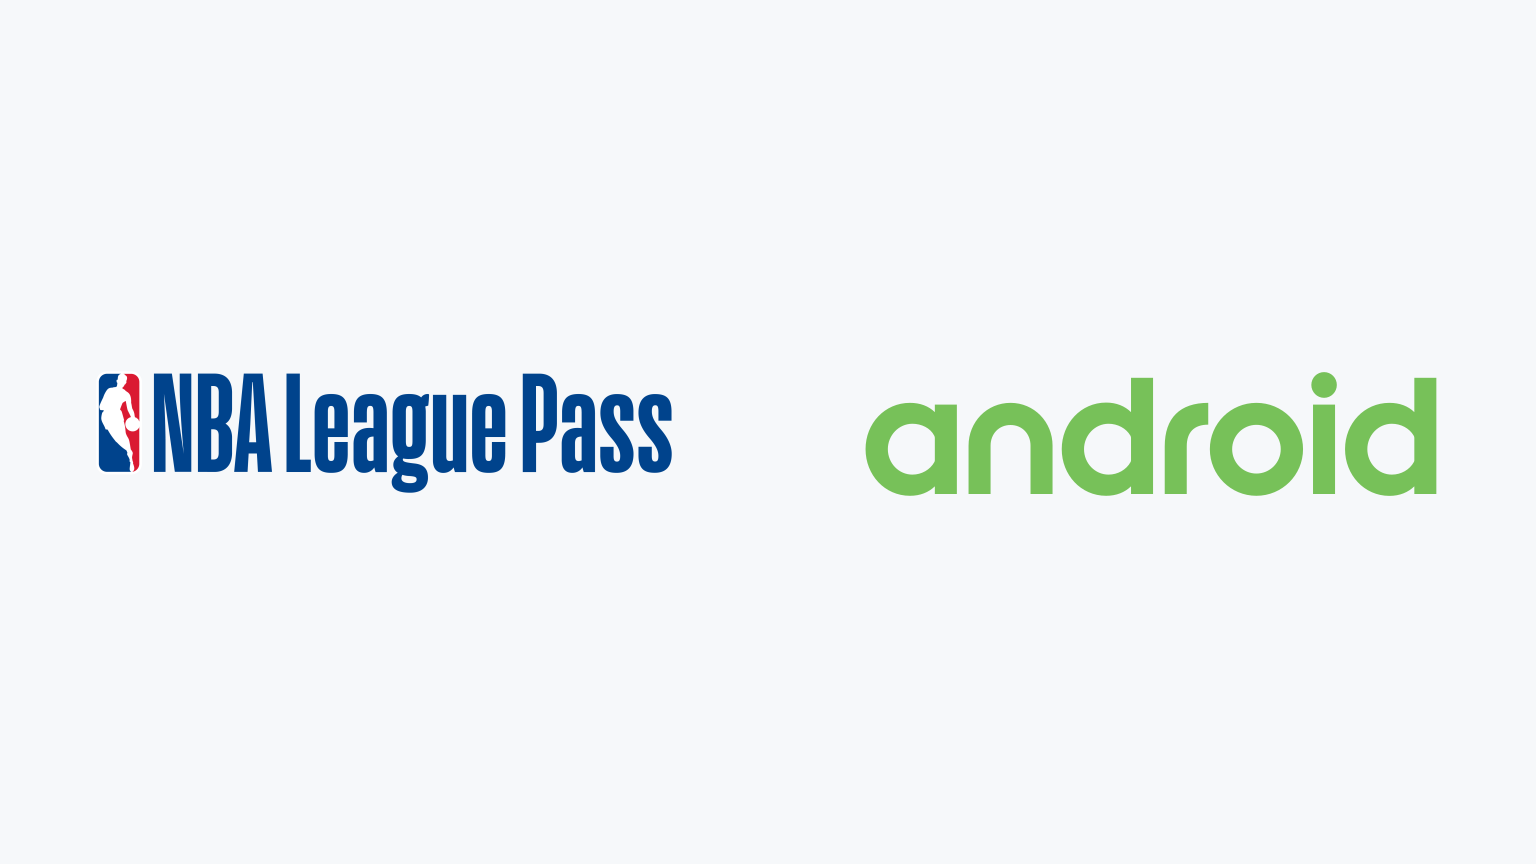 How to Watch NBA League Pass on Android Phone/Tablet